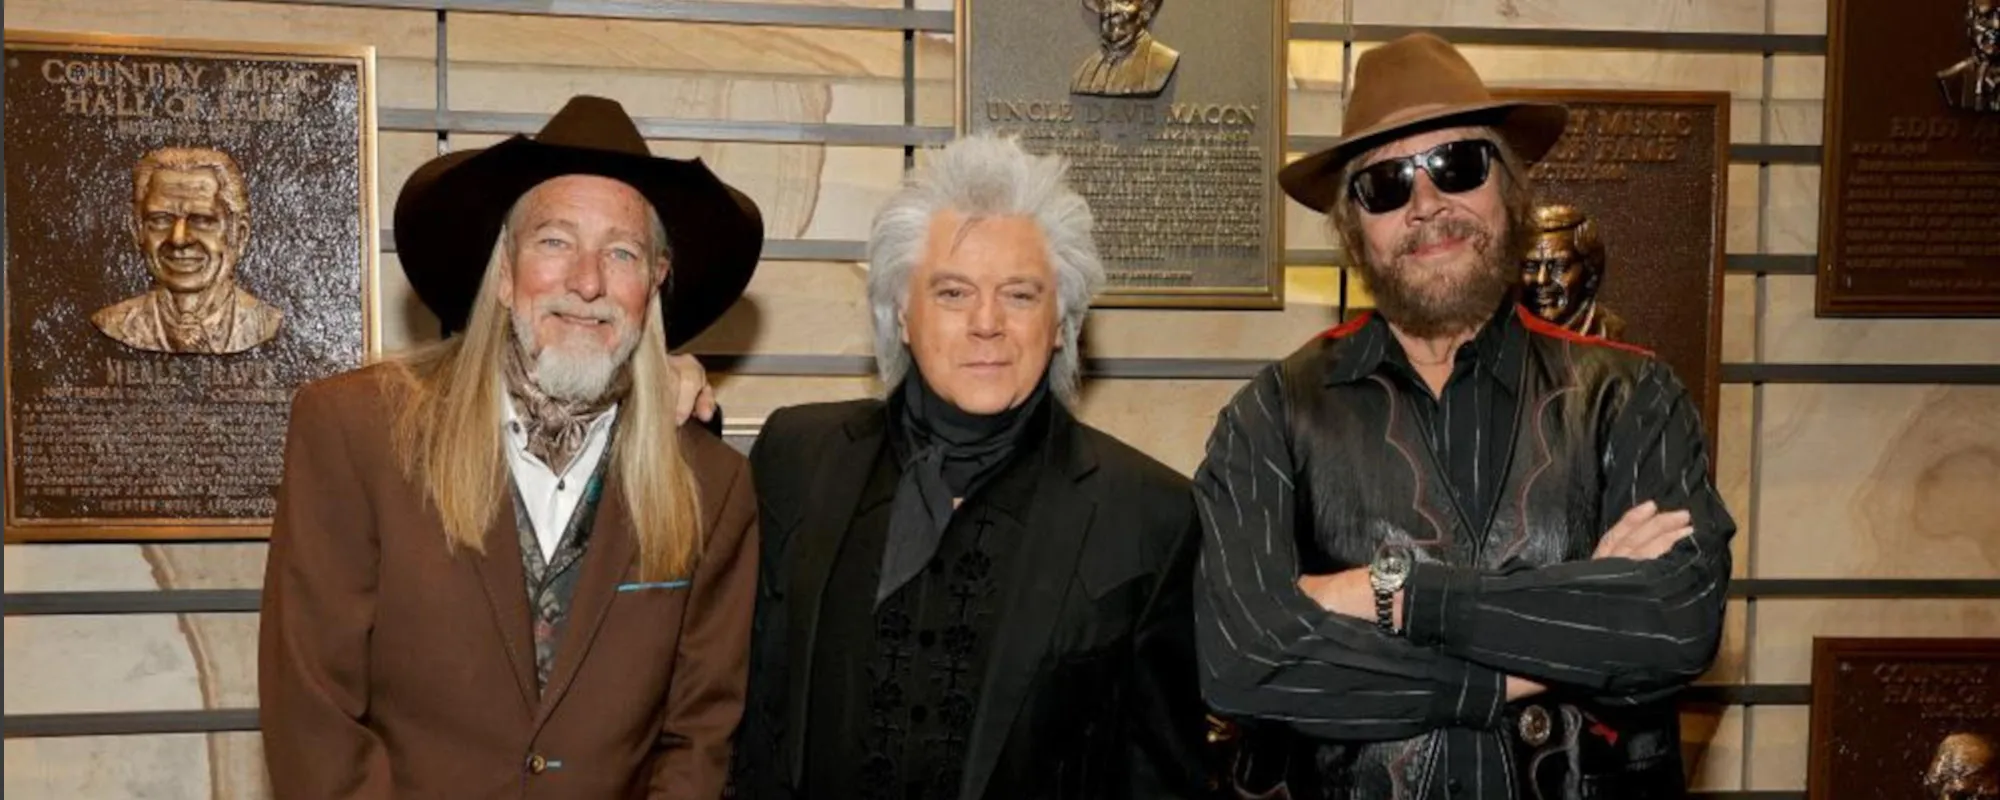 Hank Williams Jr., Marty Stuart, & Dean Dillon Inducted into Country Music Hall of Fame